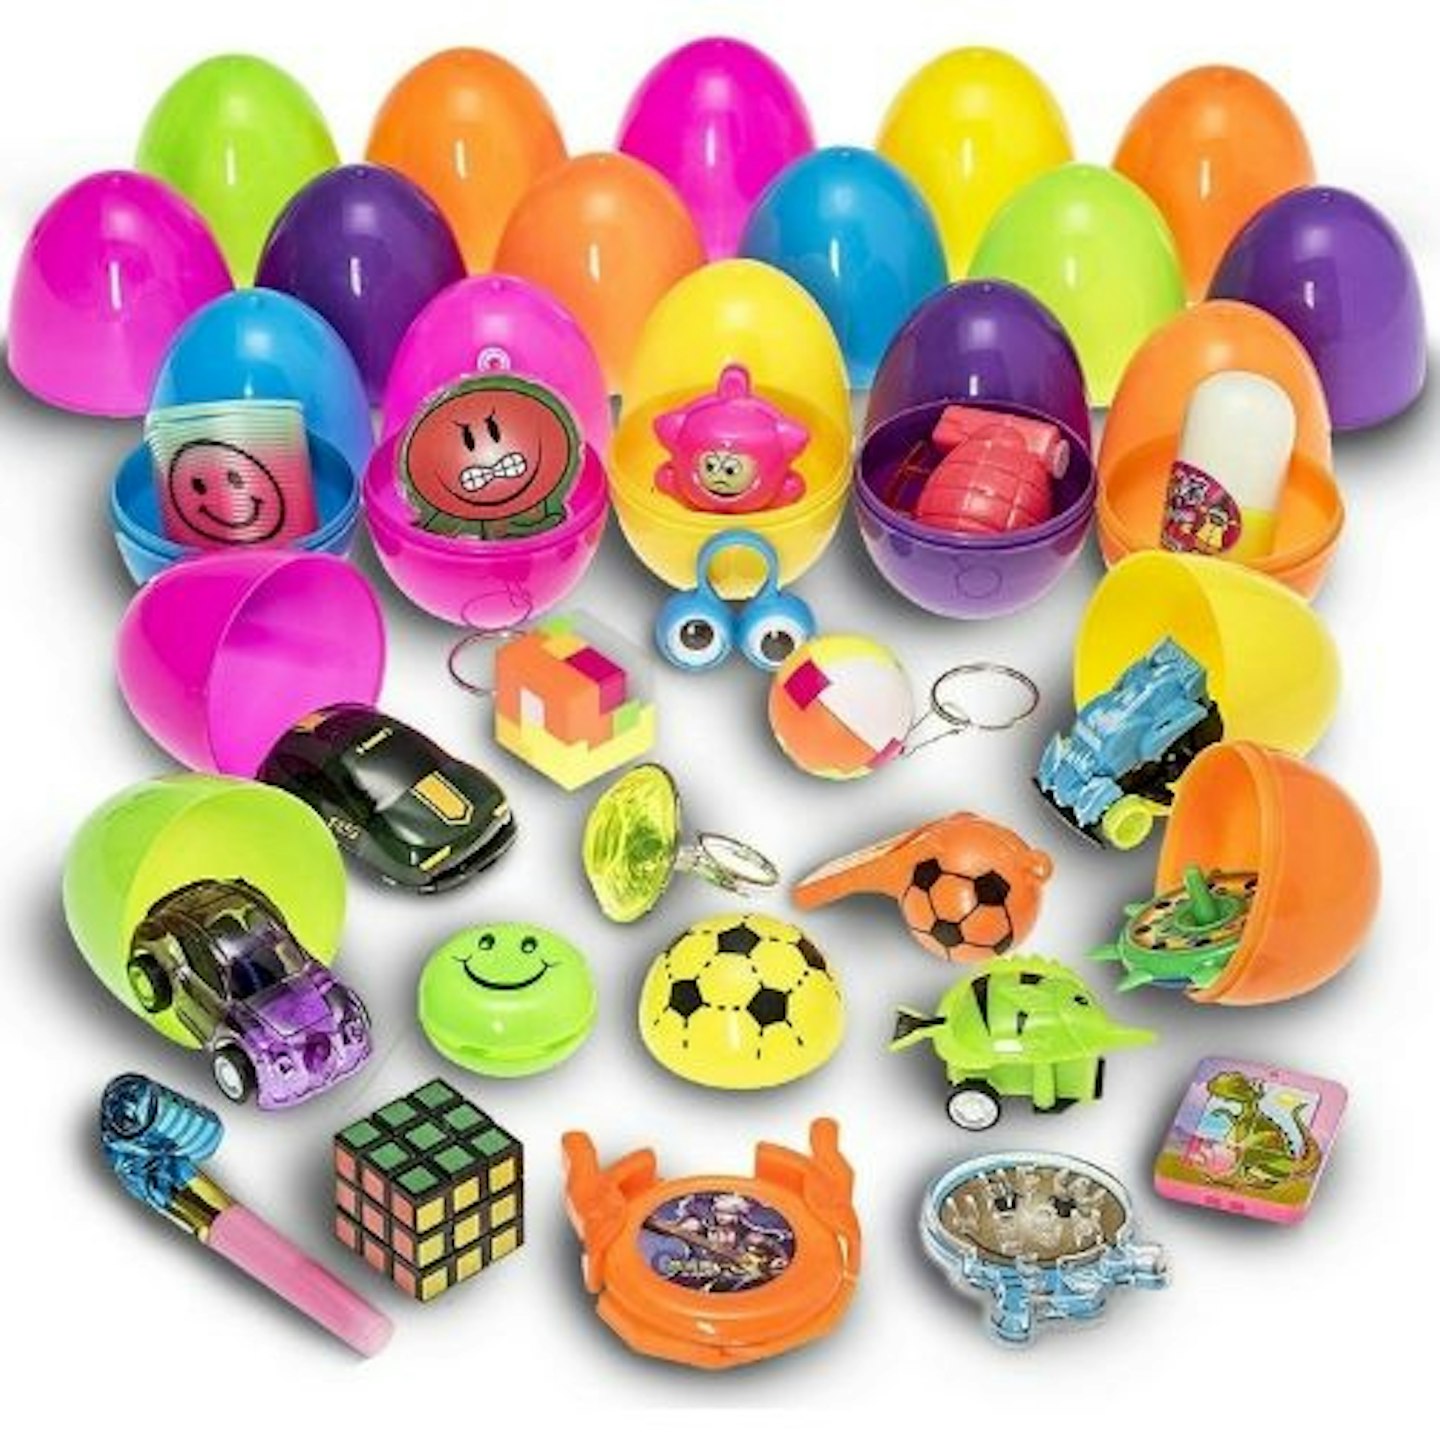 Prextex Toy Filled Easter Eggs